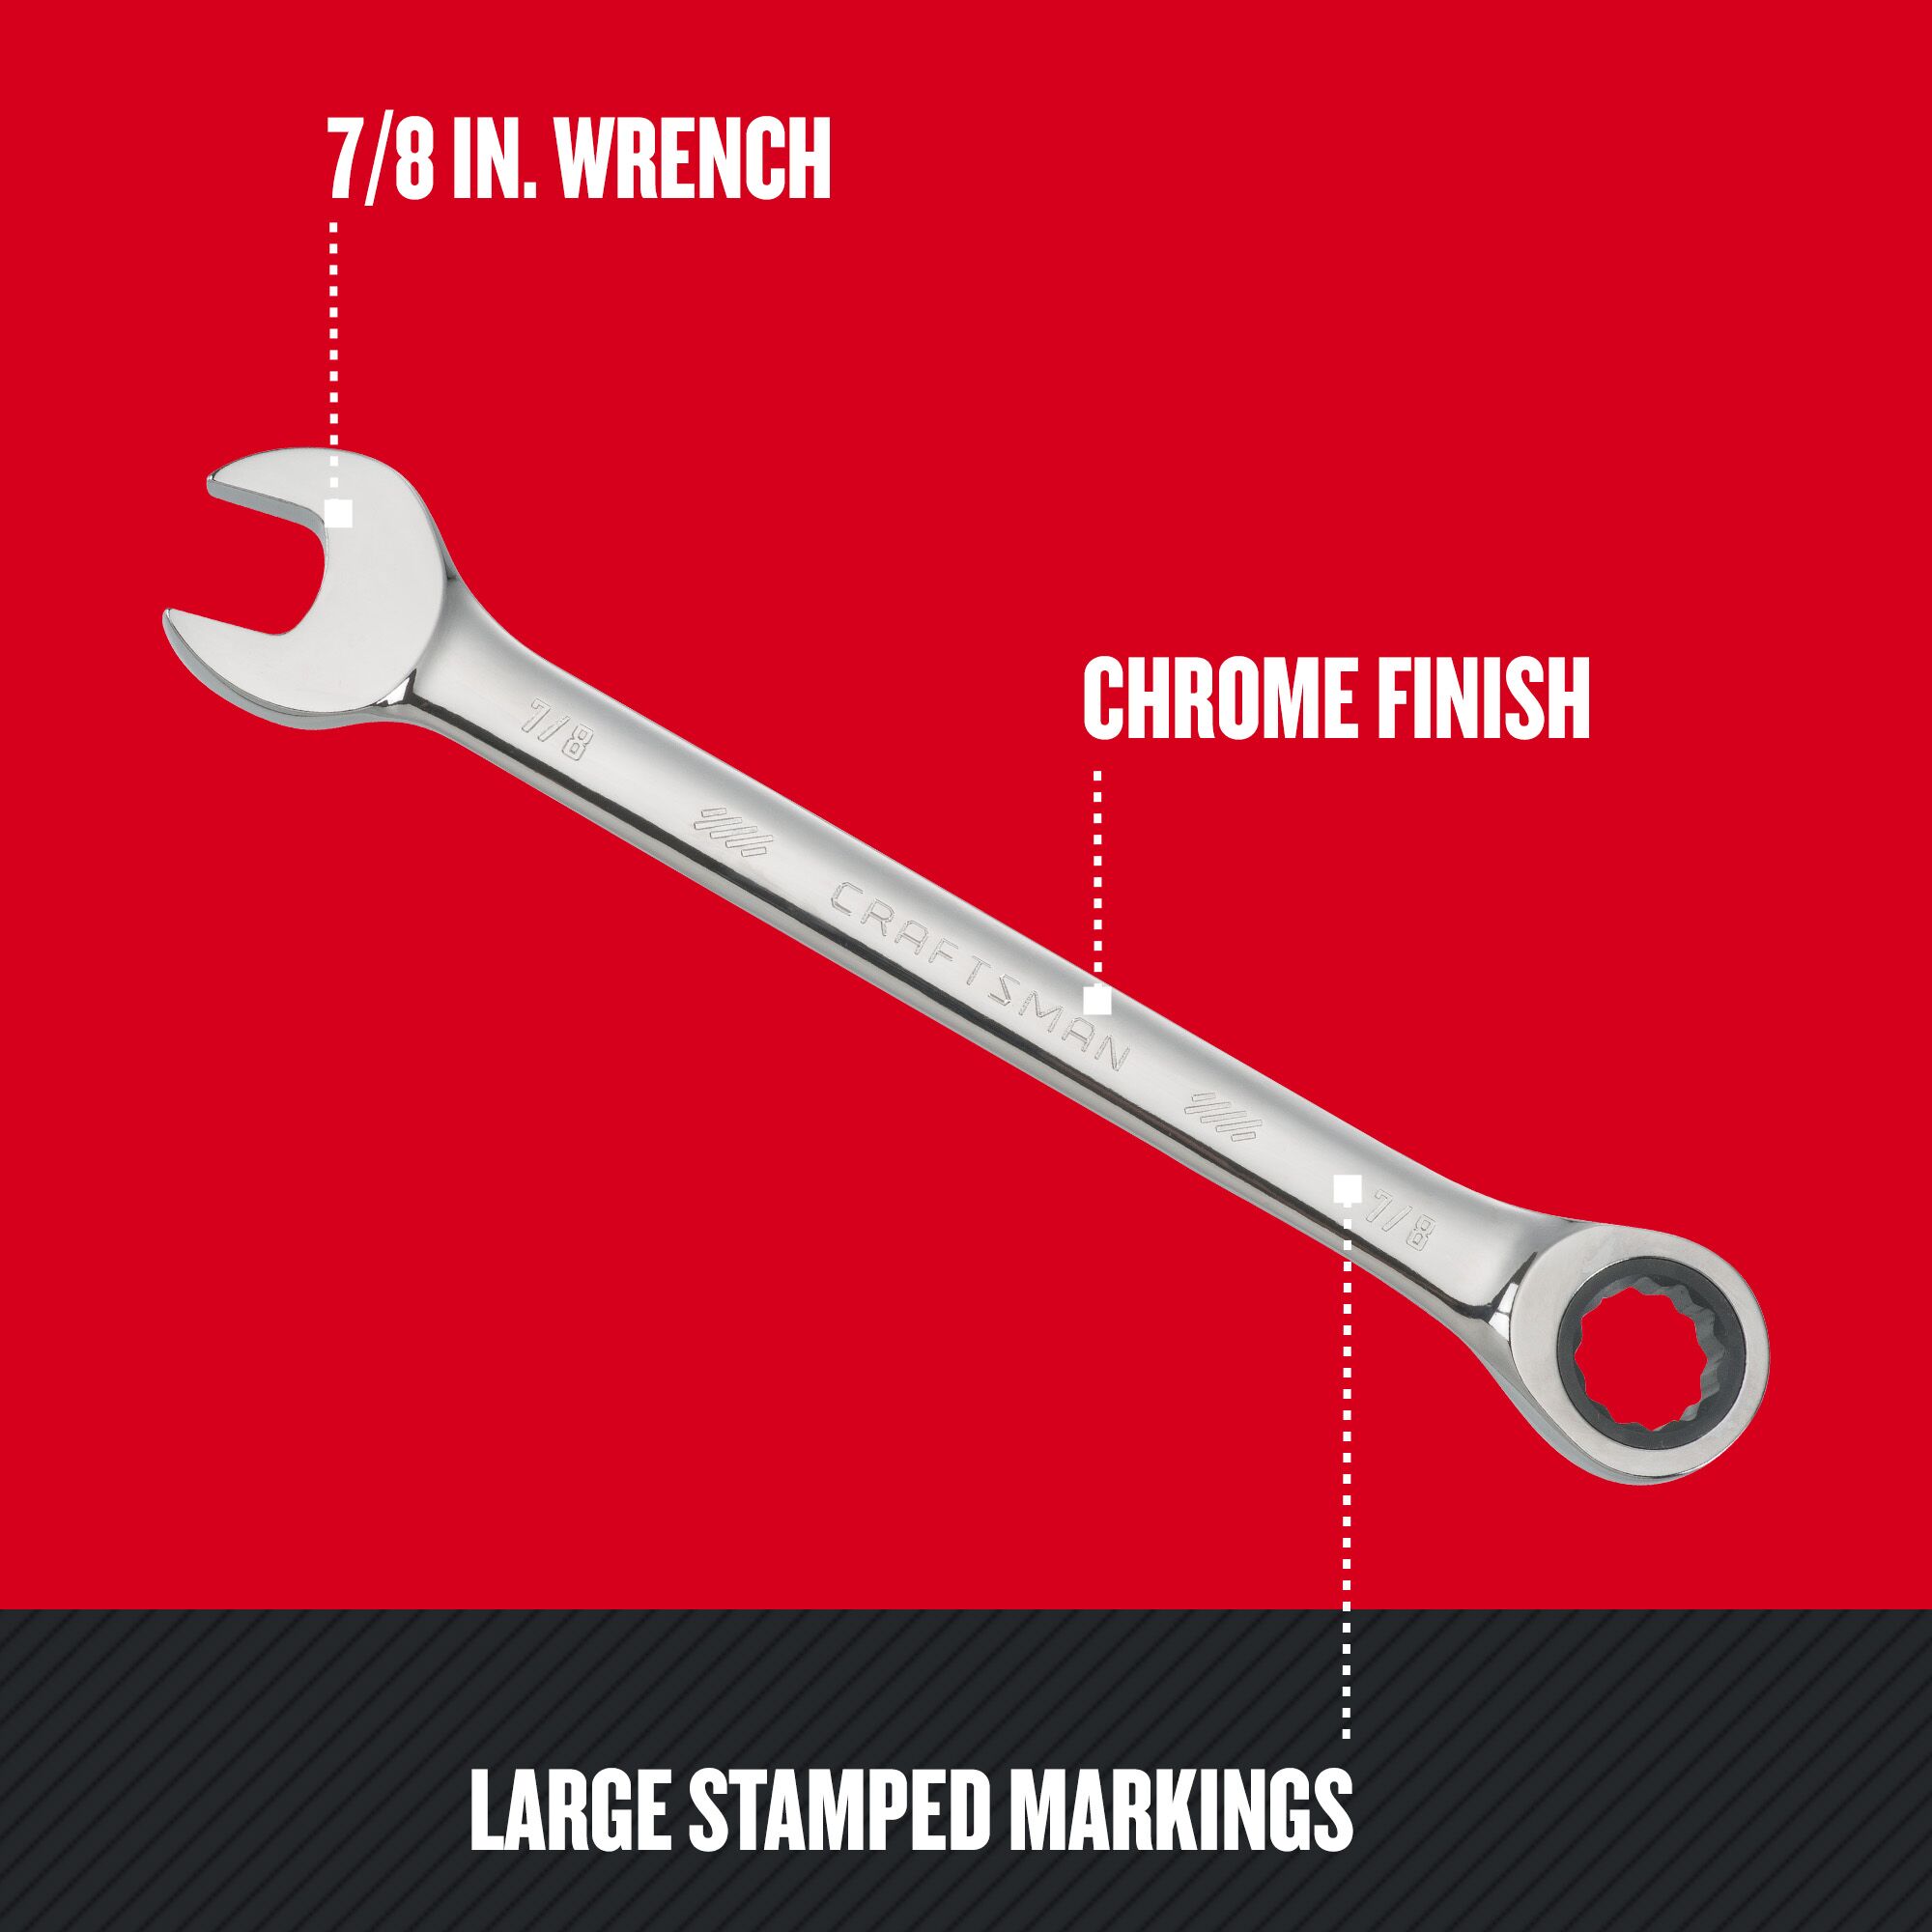 Graphic of CRAFTSMAN Wrenches: Ratcheting highlighting product features